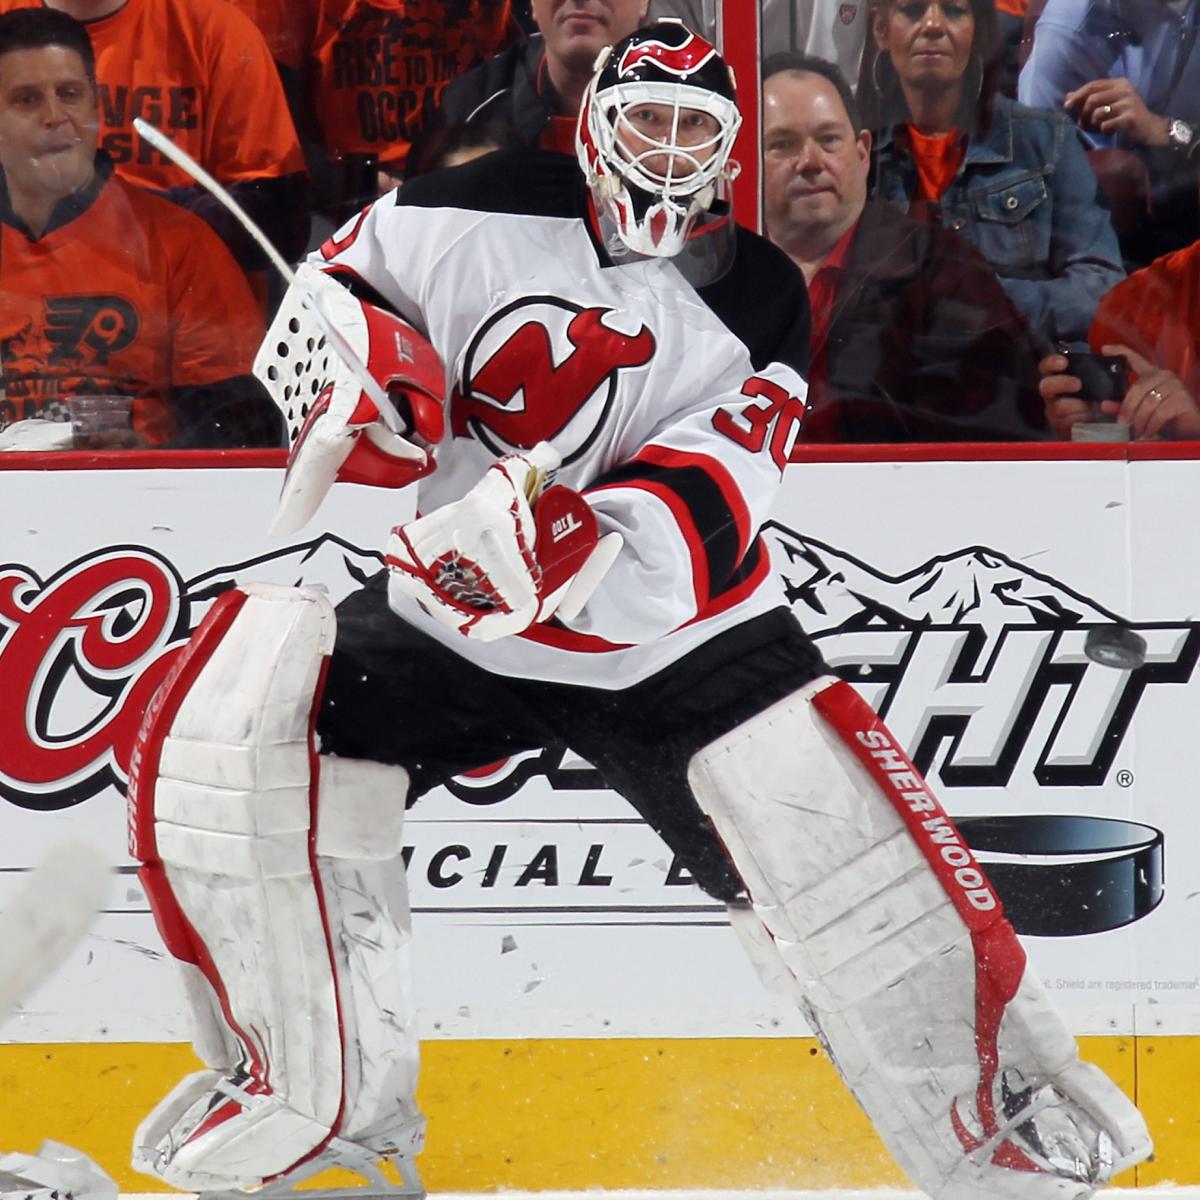 Is this the year the NJ Devils steal South Jersey Flyers fans?